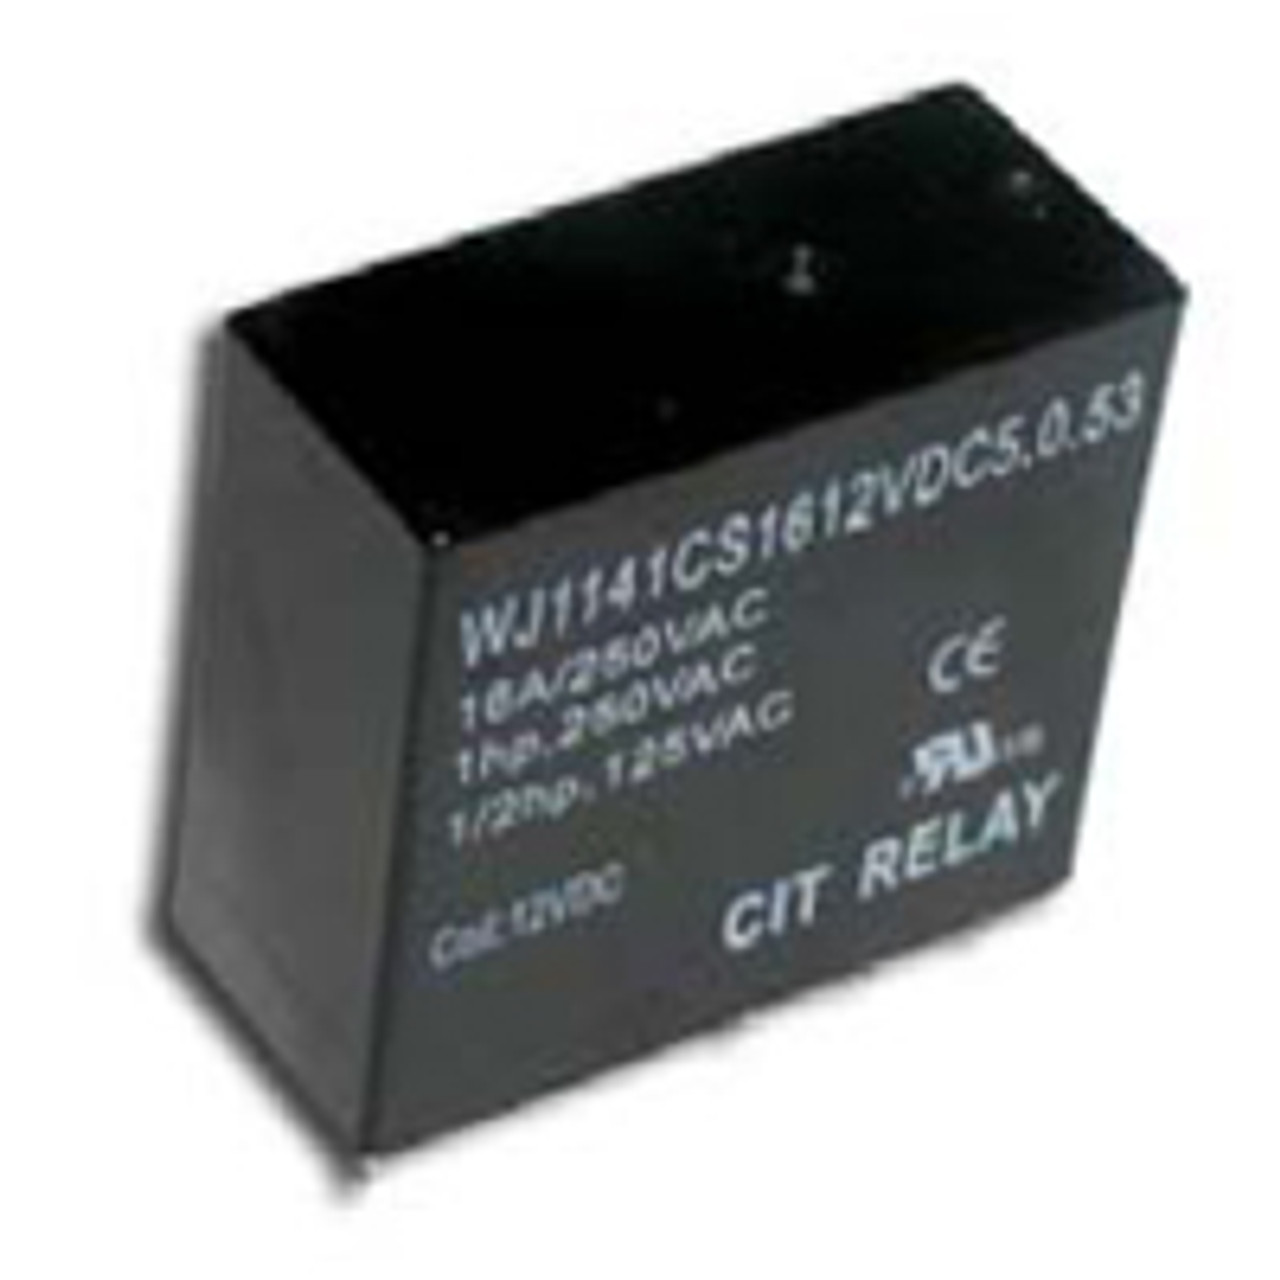 CIT Relay and Switch J1142AS56VDC5.0.80 General Purpose Relays